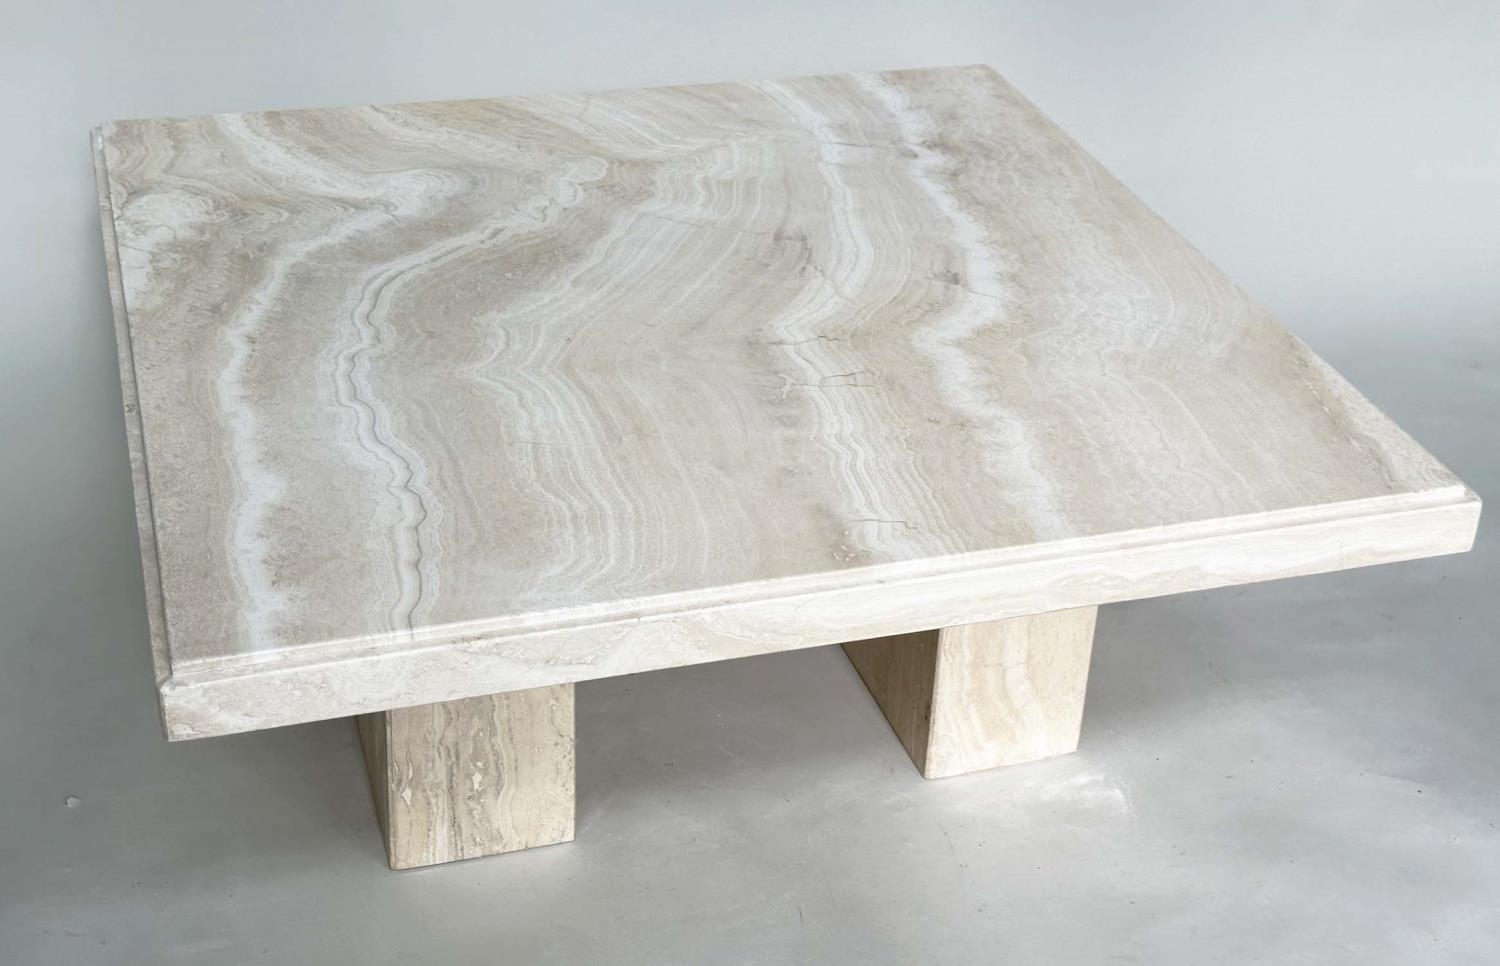 TRAVERTINE LOW TABLE, 1970's Italian travertine marble square with plinth support, 100cm x 100cm x - Image 8 of 9